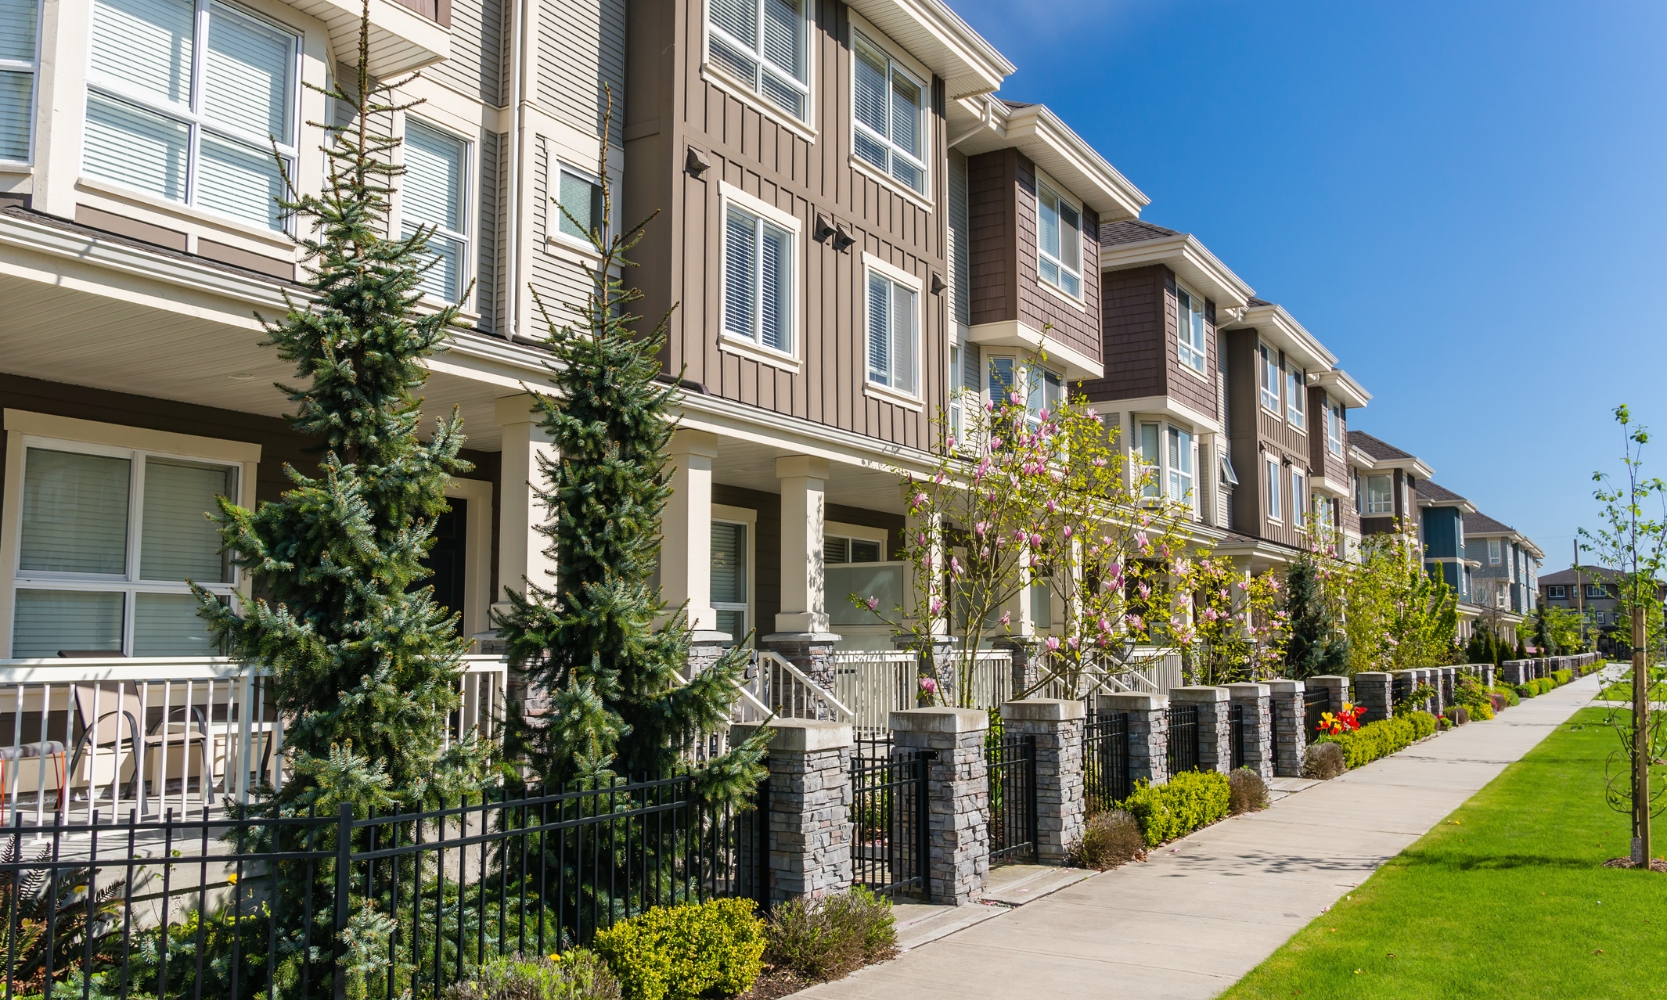 A row of suburban condos with front patios and a tree-lined sidewalk